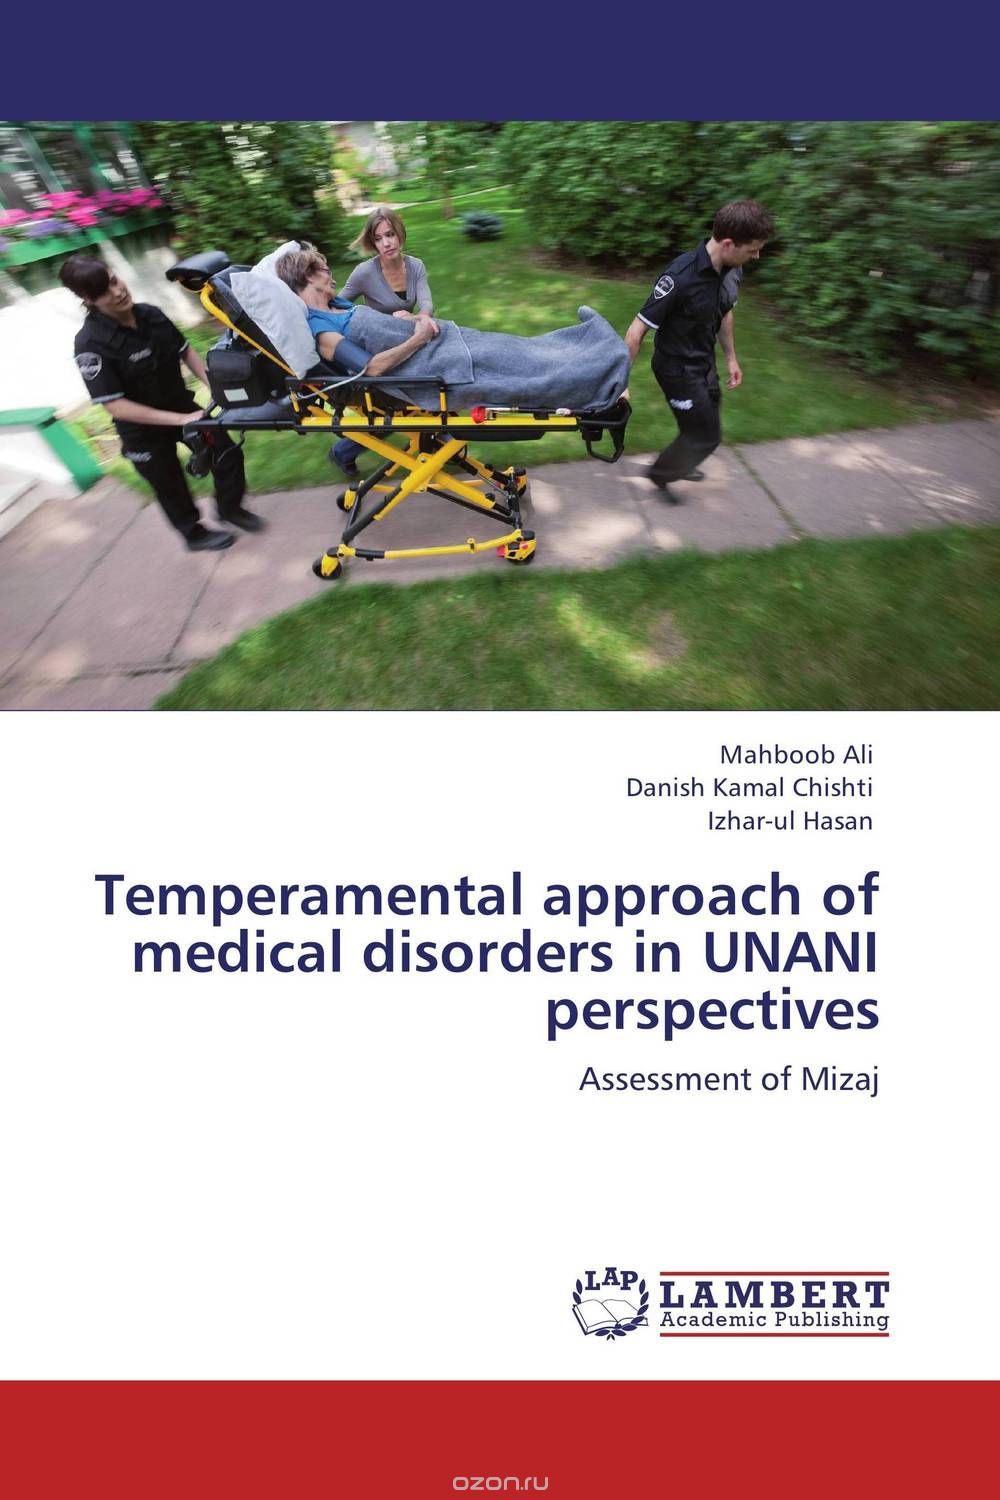 Скачать книгу "Temperamental approach of medical disorders in UNANI perspectives"